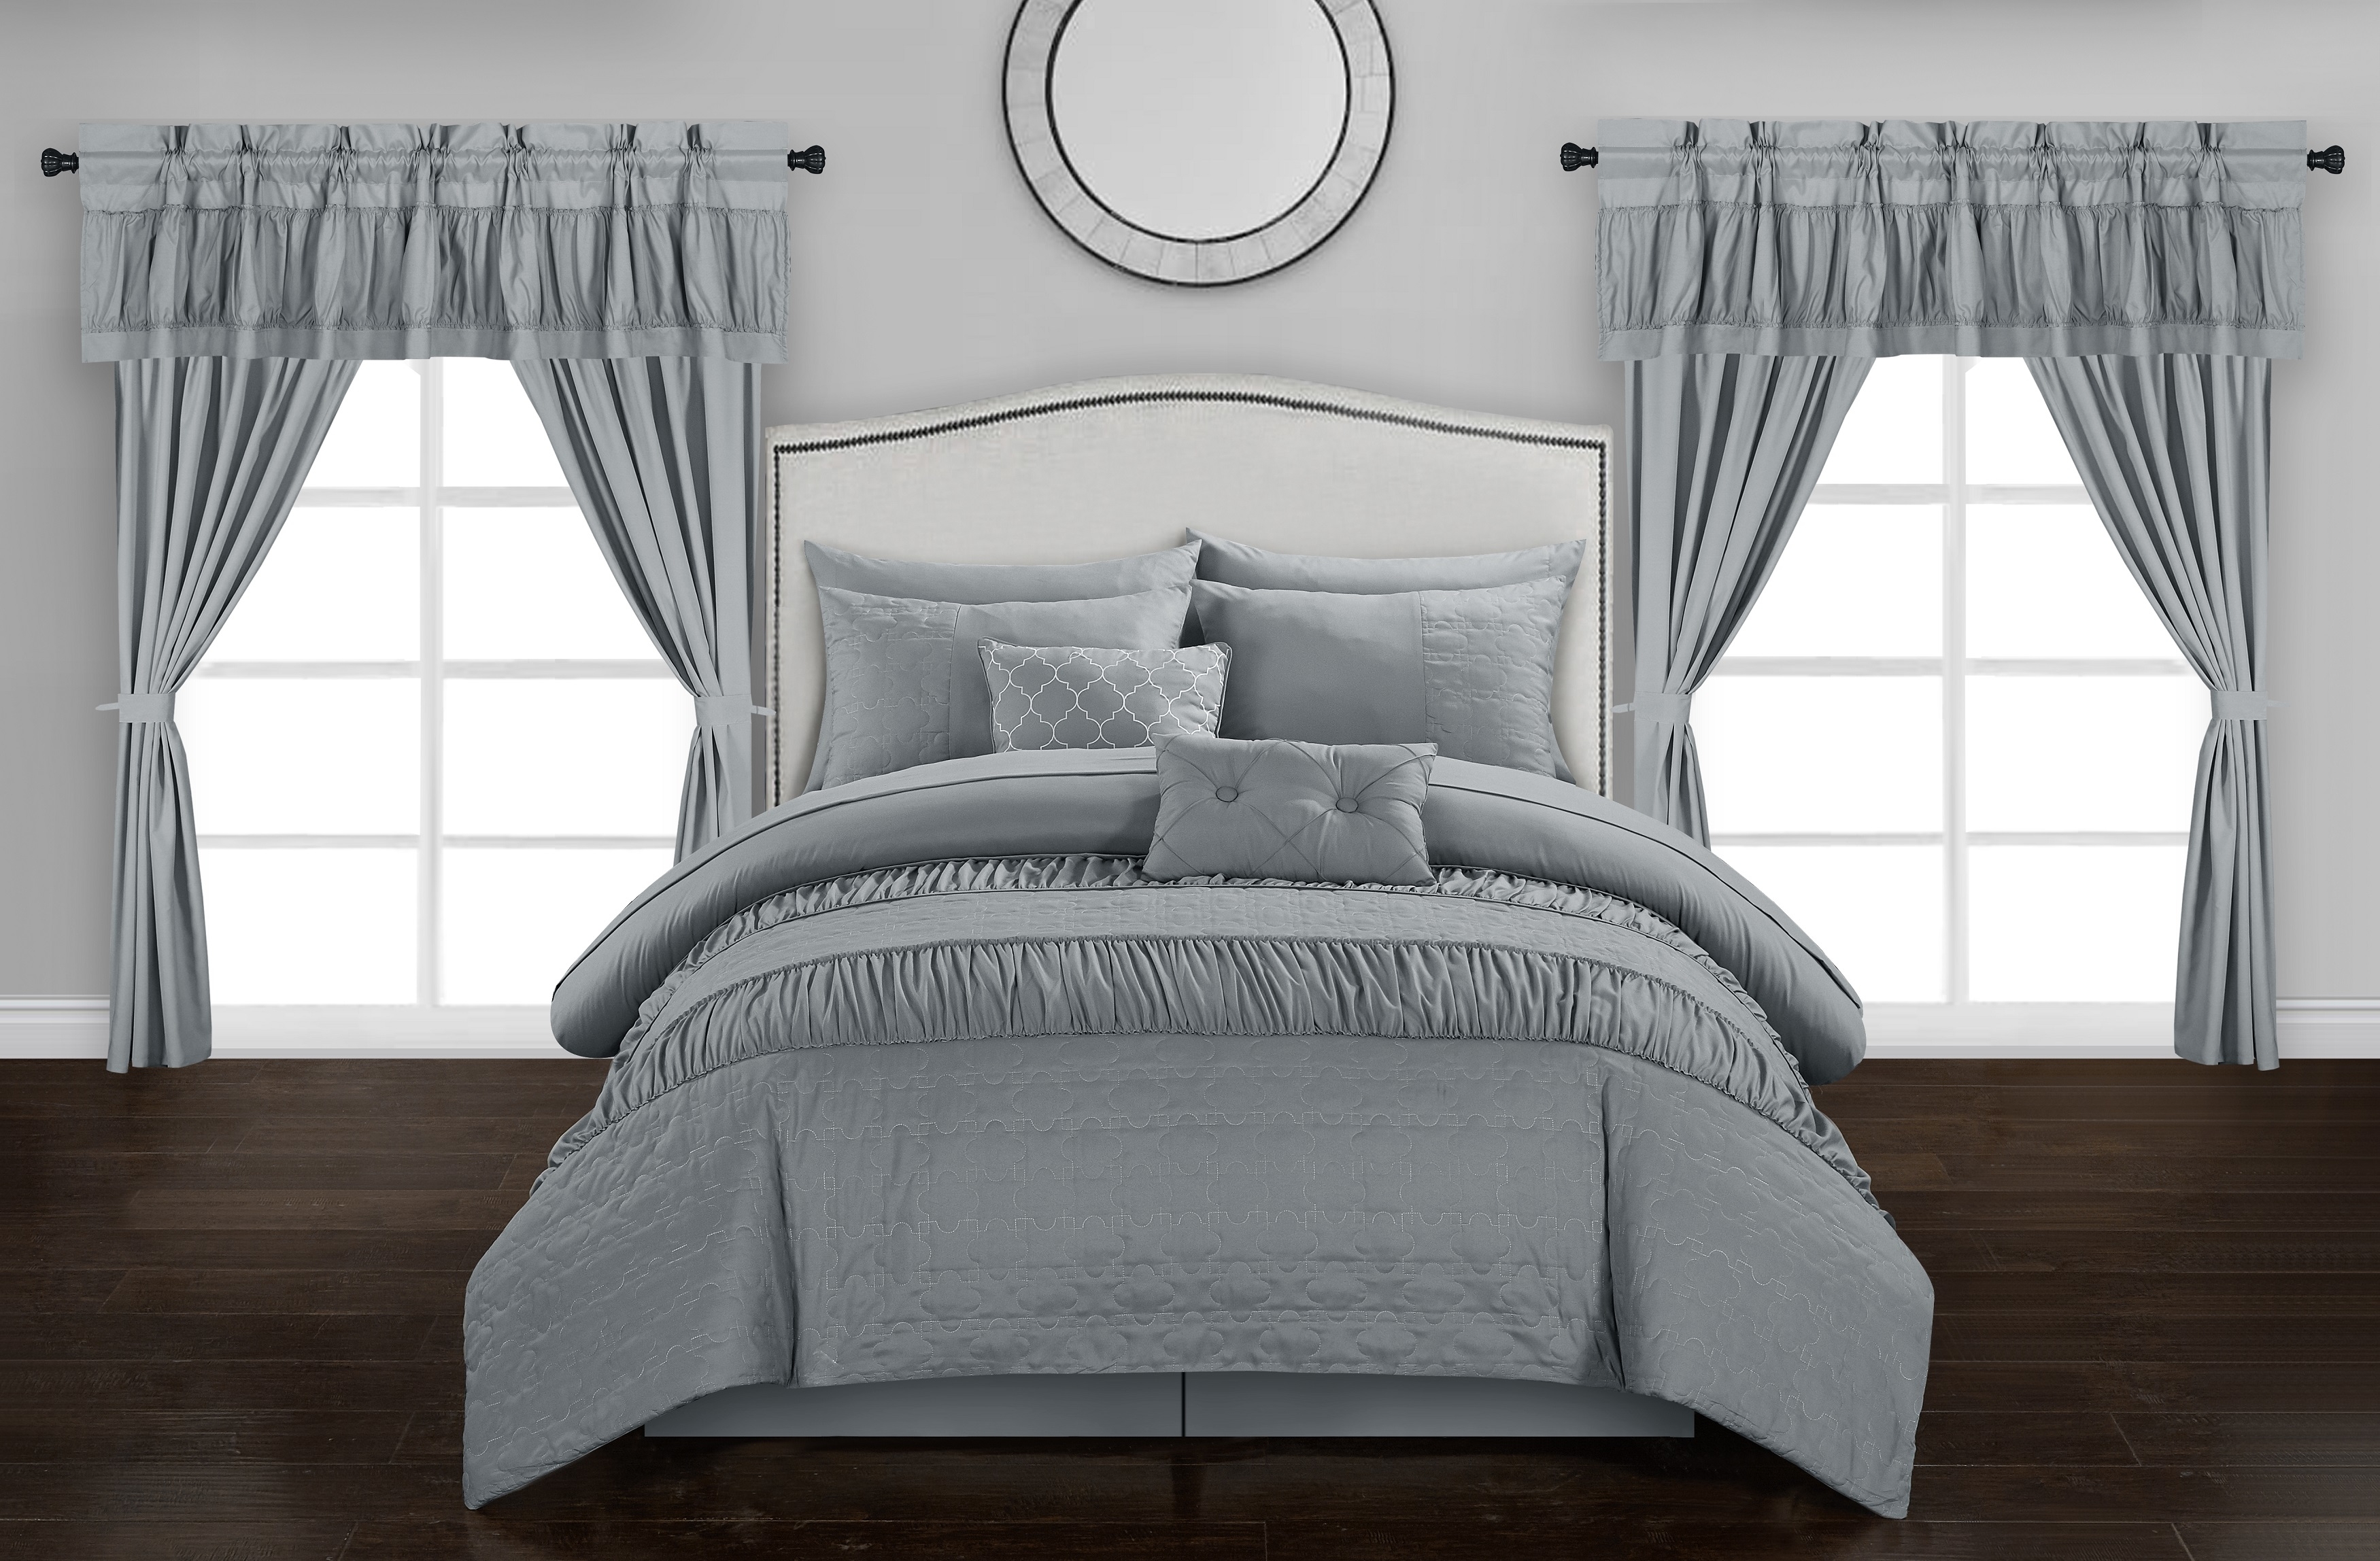 Mykonos 20 Piece Comforter Set Embossed Bedding - Sheets Window Treatments Decorative Pillows Shams Bed Skirt Included - Grey, King